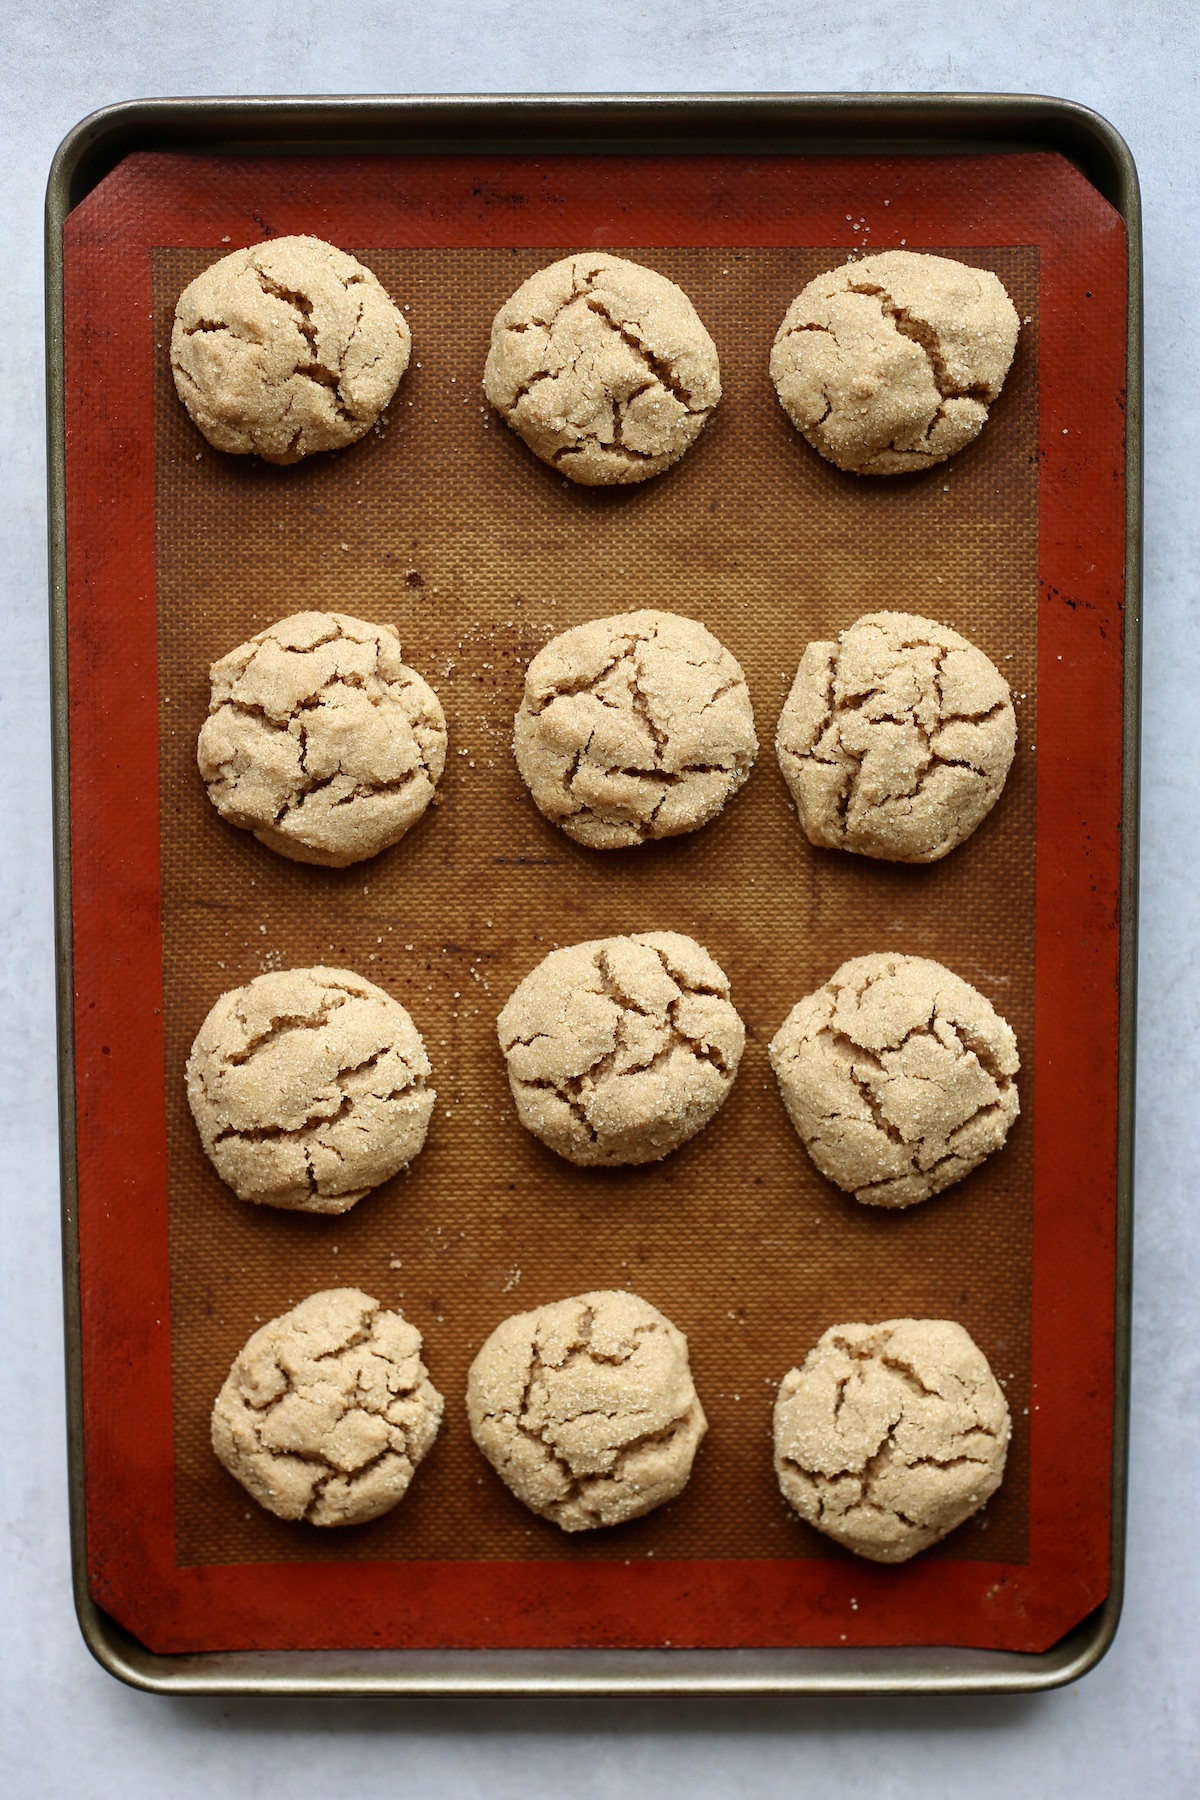 An overhead shot of 12 cracked vegan peanut butter cookies just after baking on a silicone lined baking sheet.